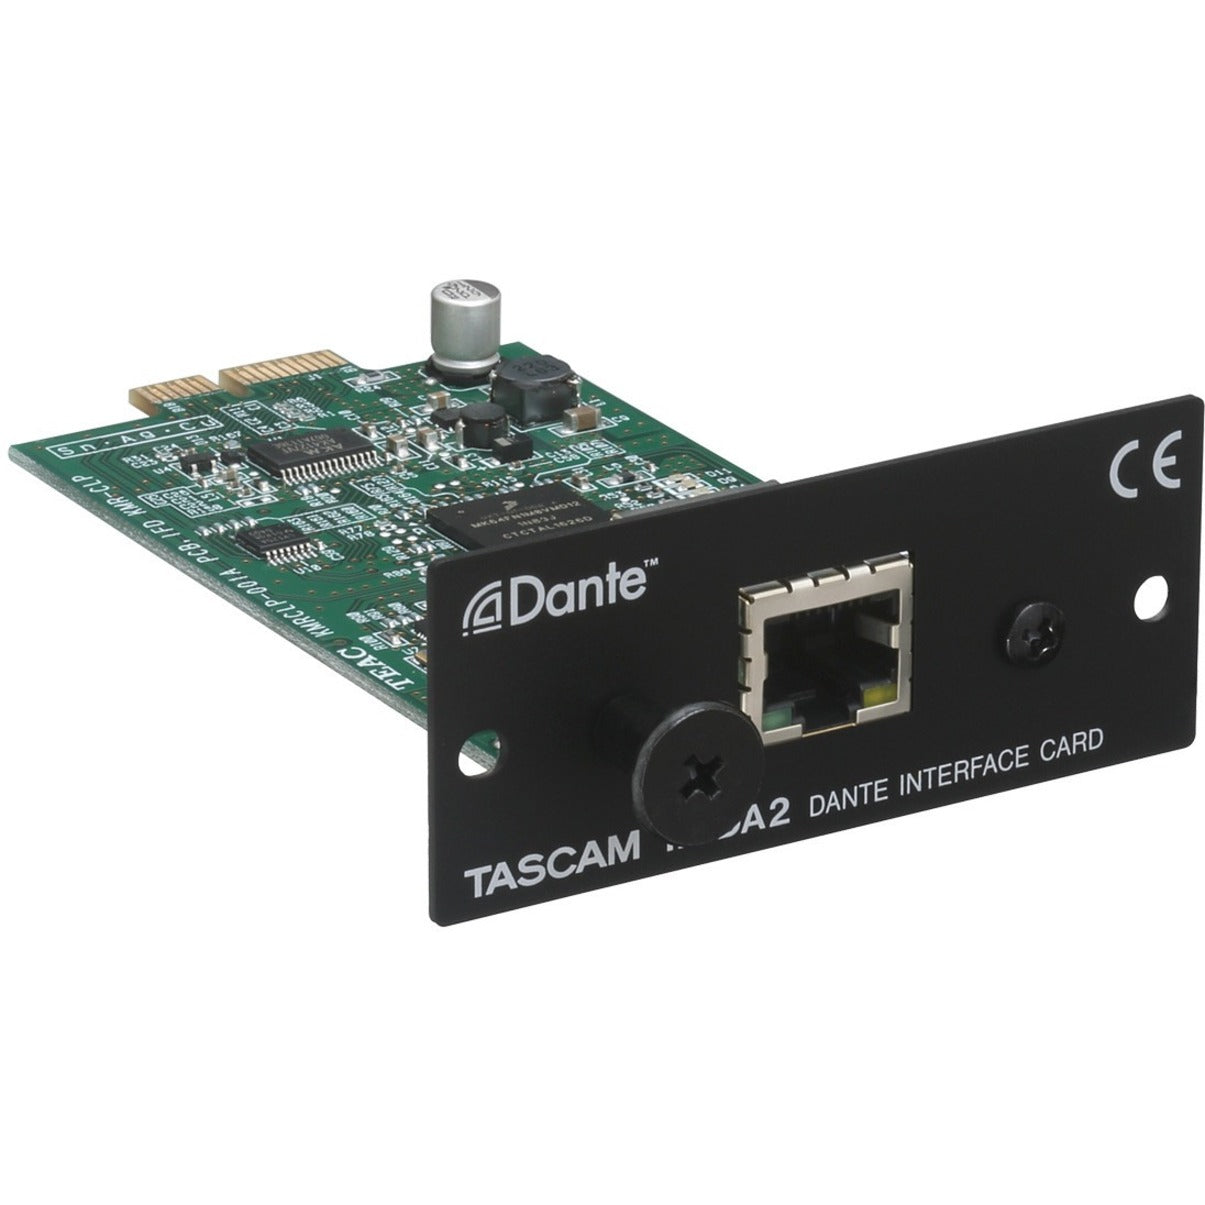 TASCAM IF-DA2 interface card supporting Dante 2ch input and output